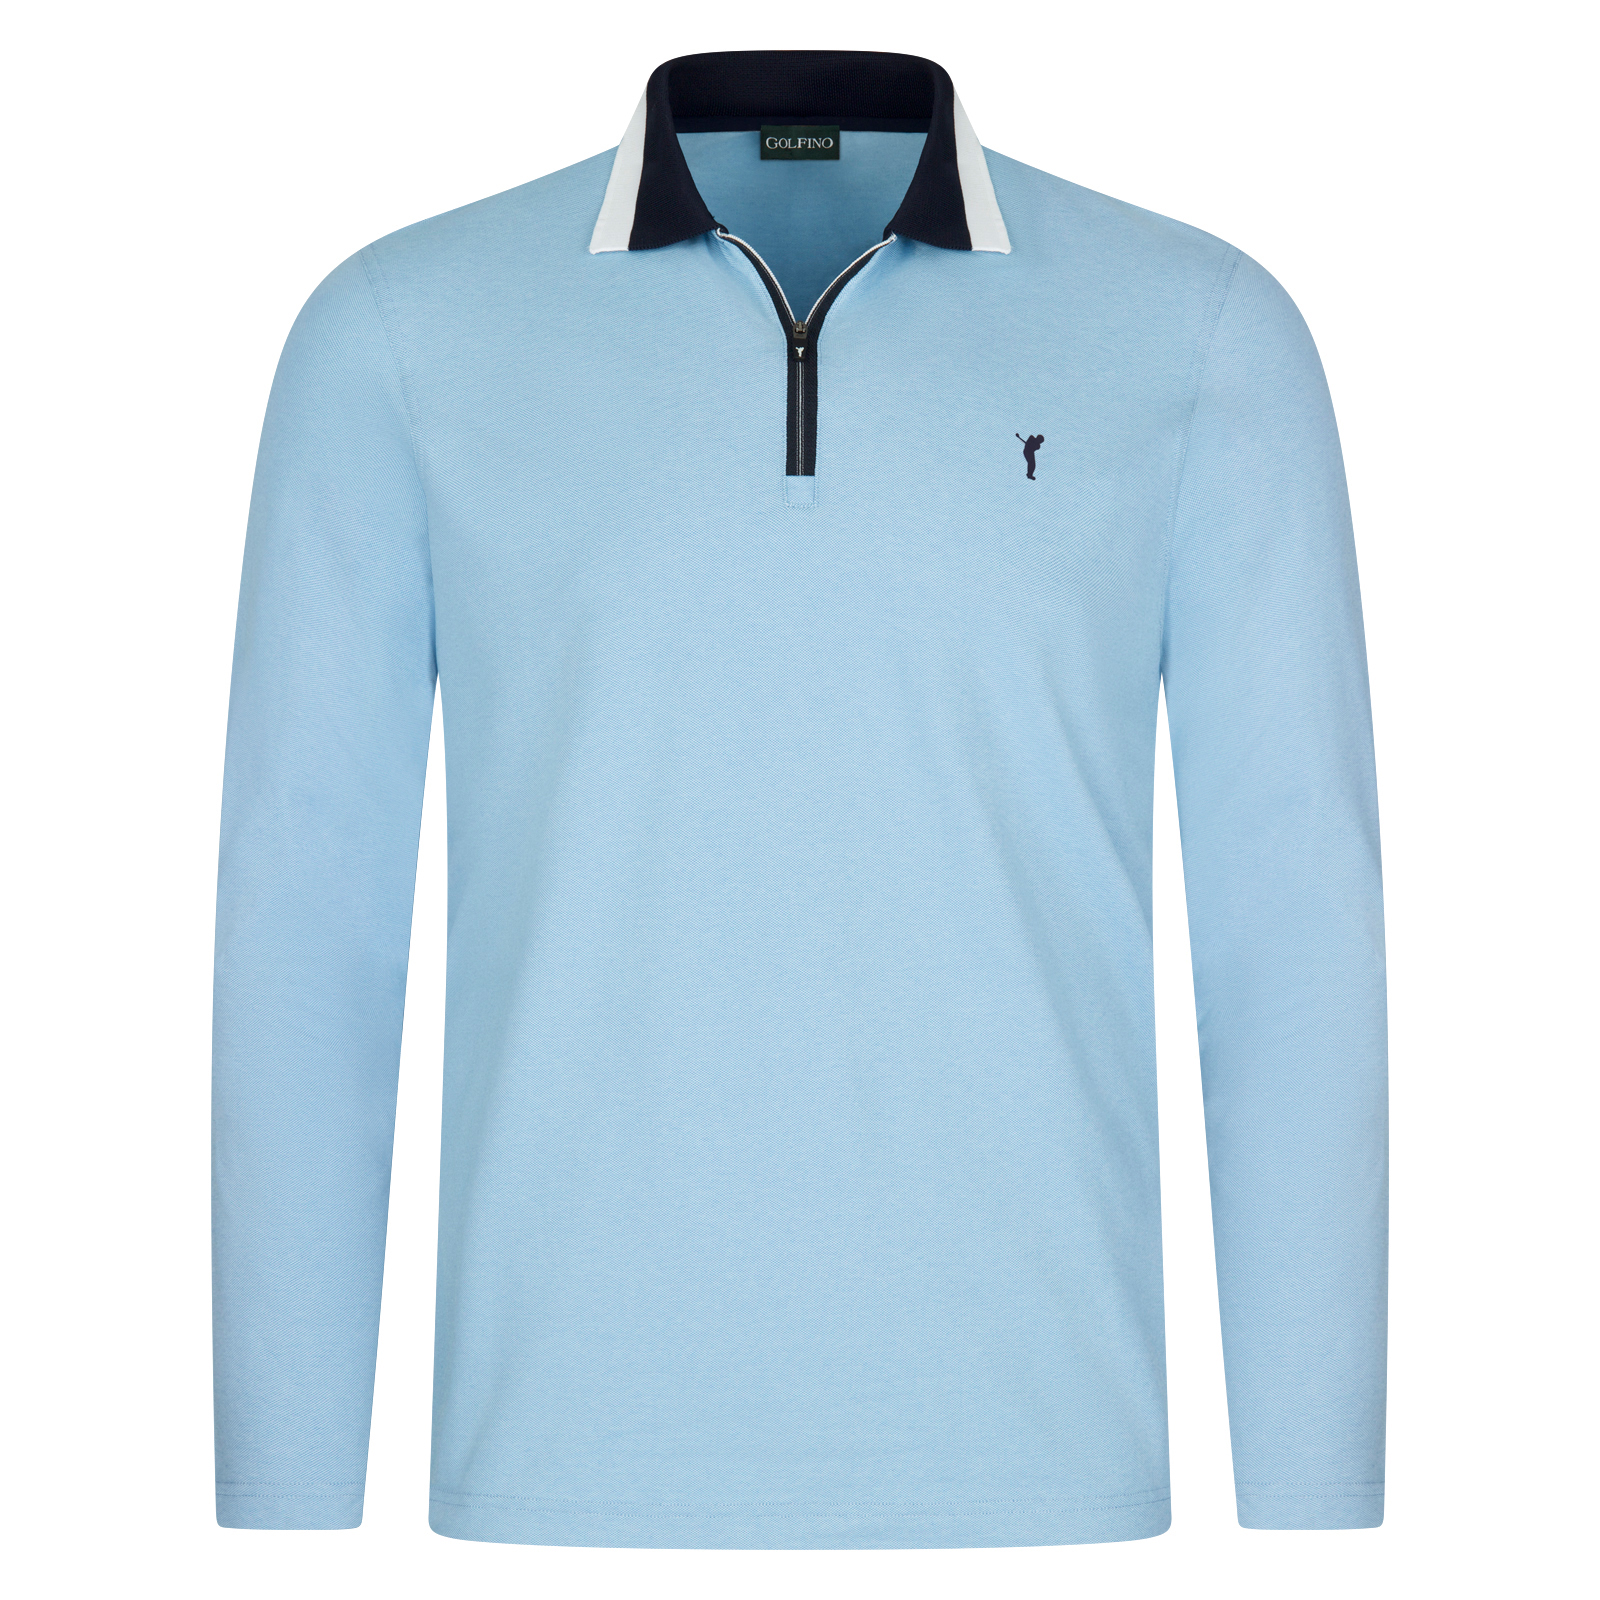 Men's stylish long-sleeved golf polo shirt with UV protection